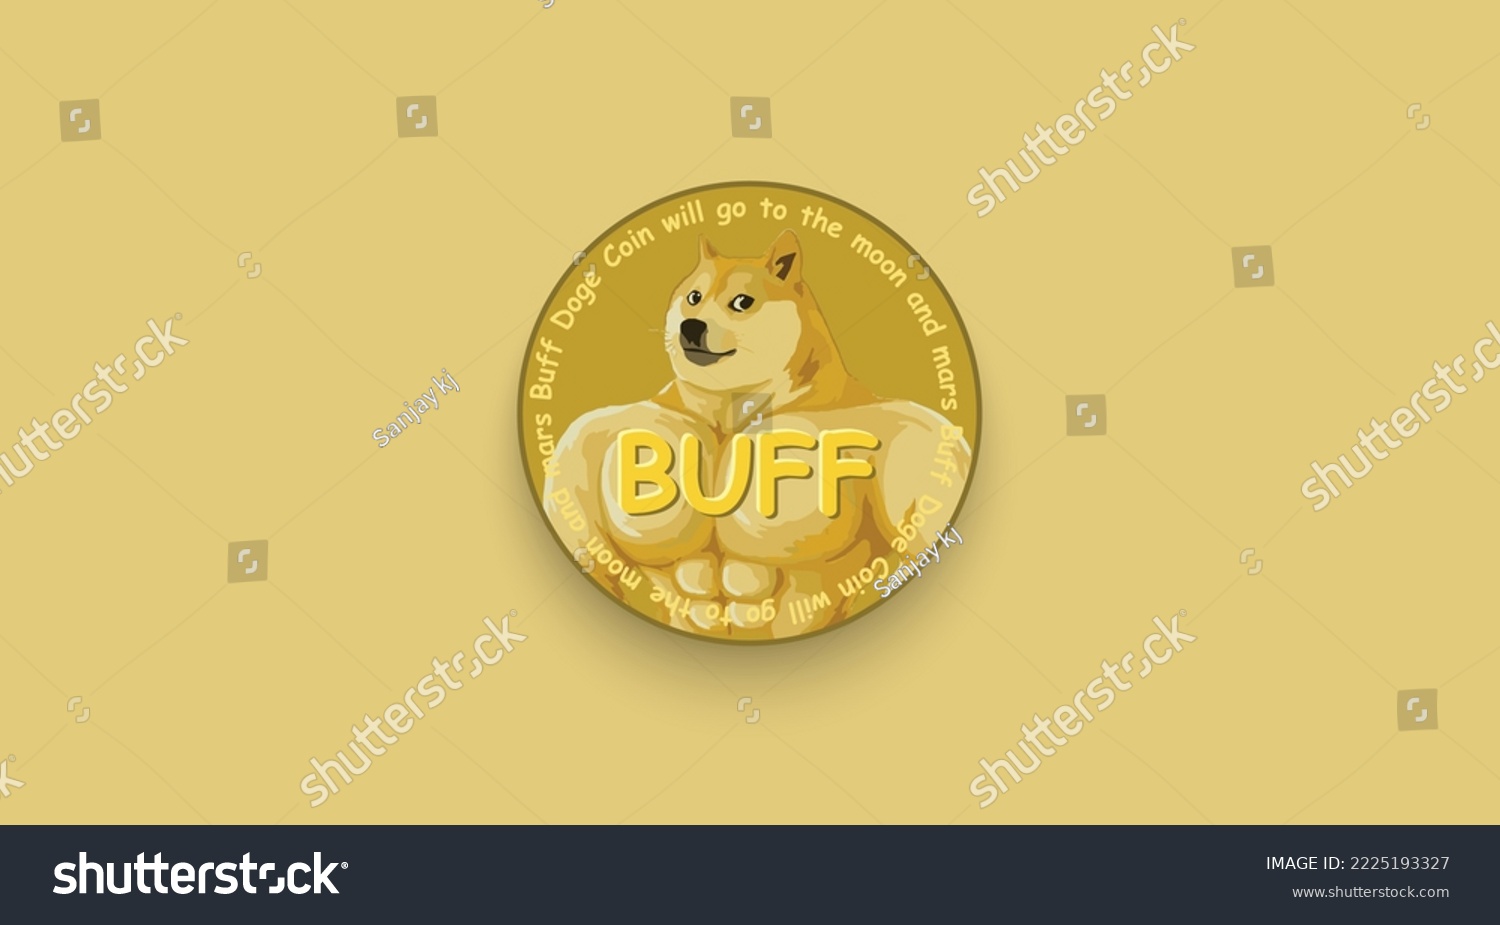 SVG of Buff Doge Coin, DOGECOIN Token cryptocurrency logo on isolated background with copy space. 3d vector illustration of Buff Doge Coin, DOGECOIN token icon banner. svg